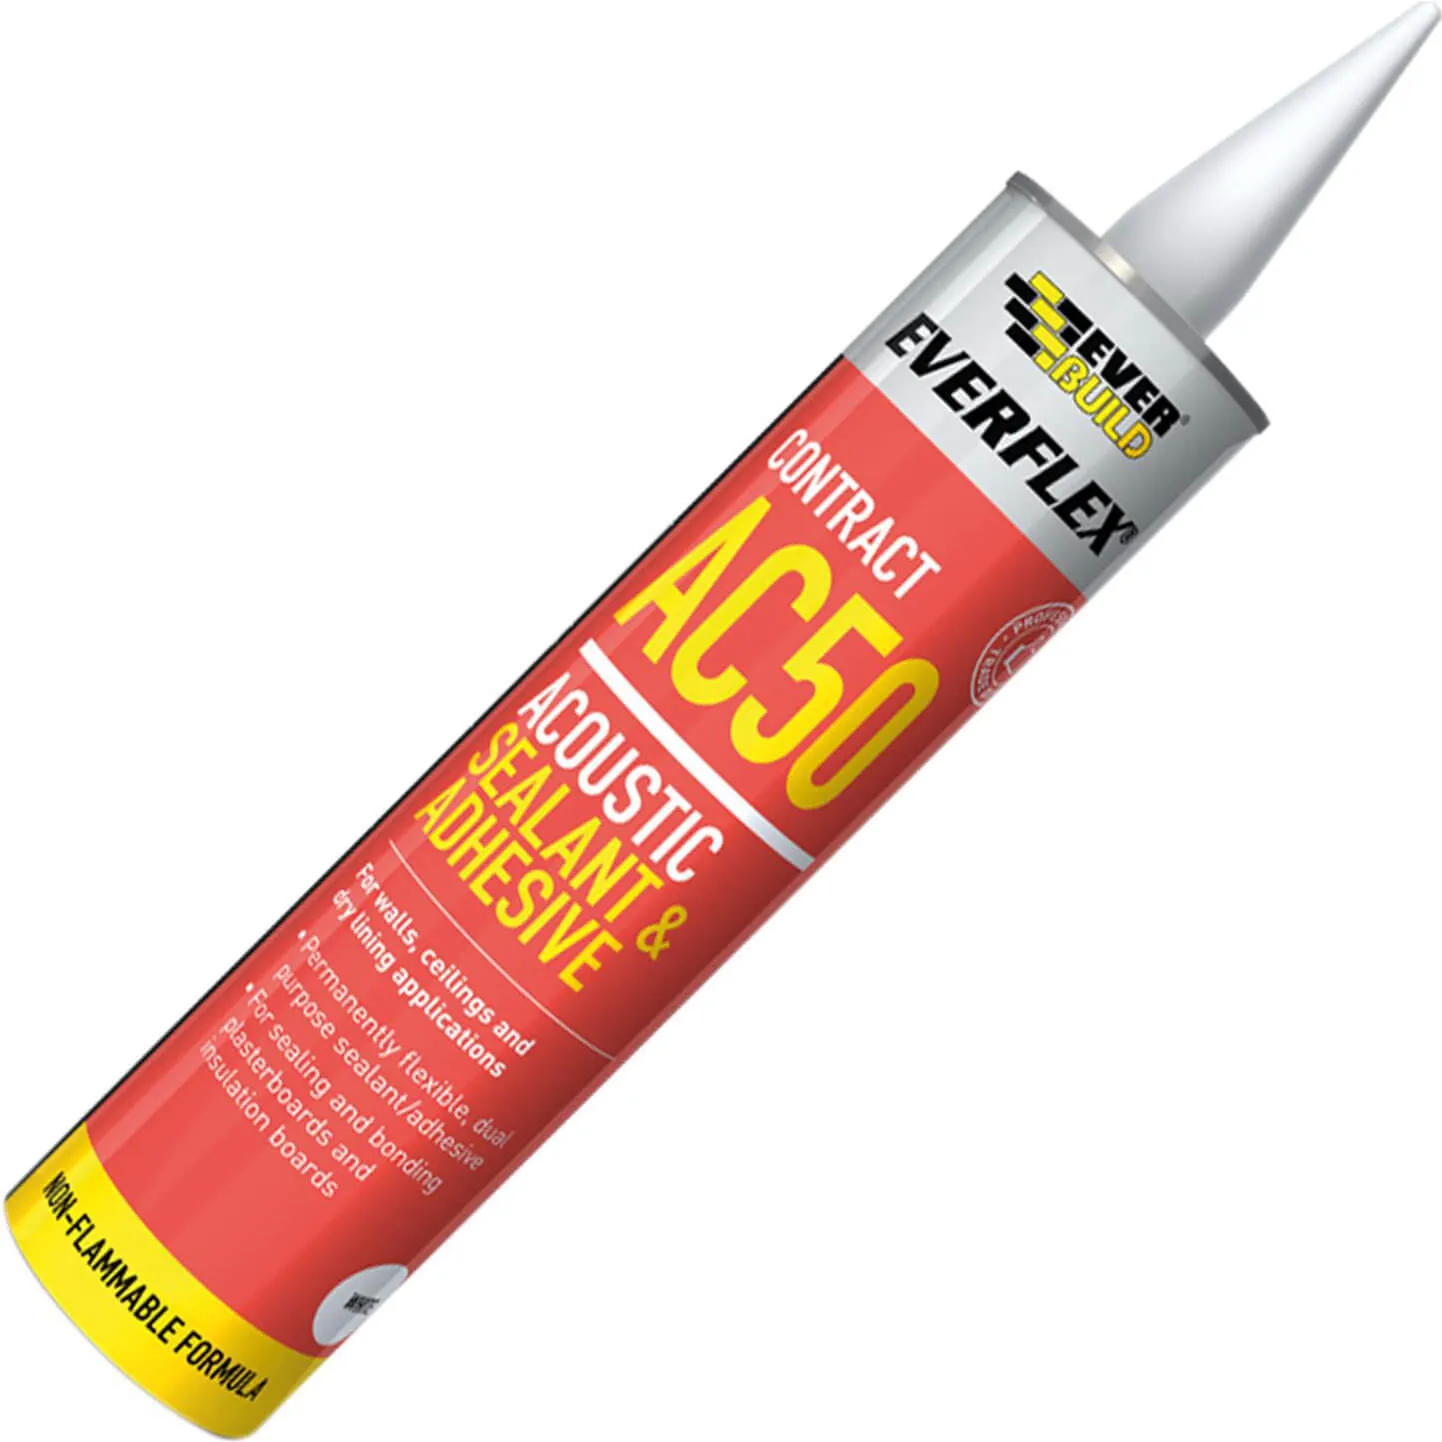 Everbuild Acoustic Sealant and Adhesive - 900ml